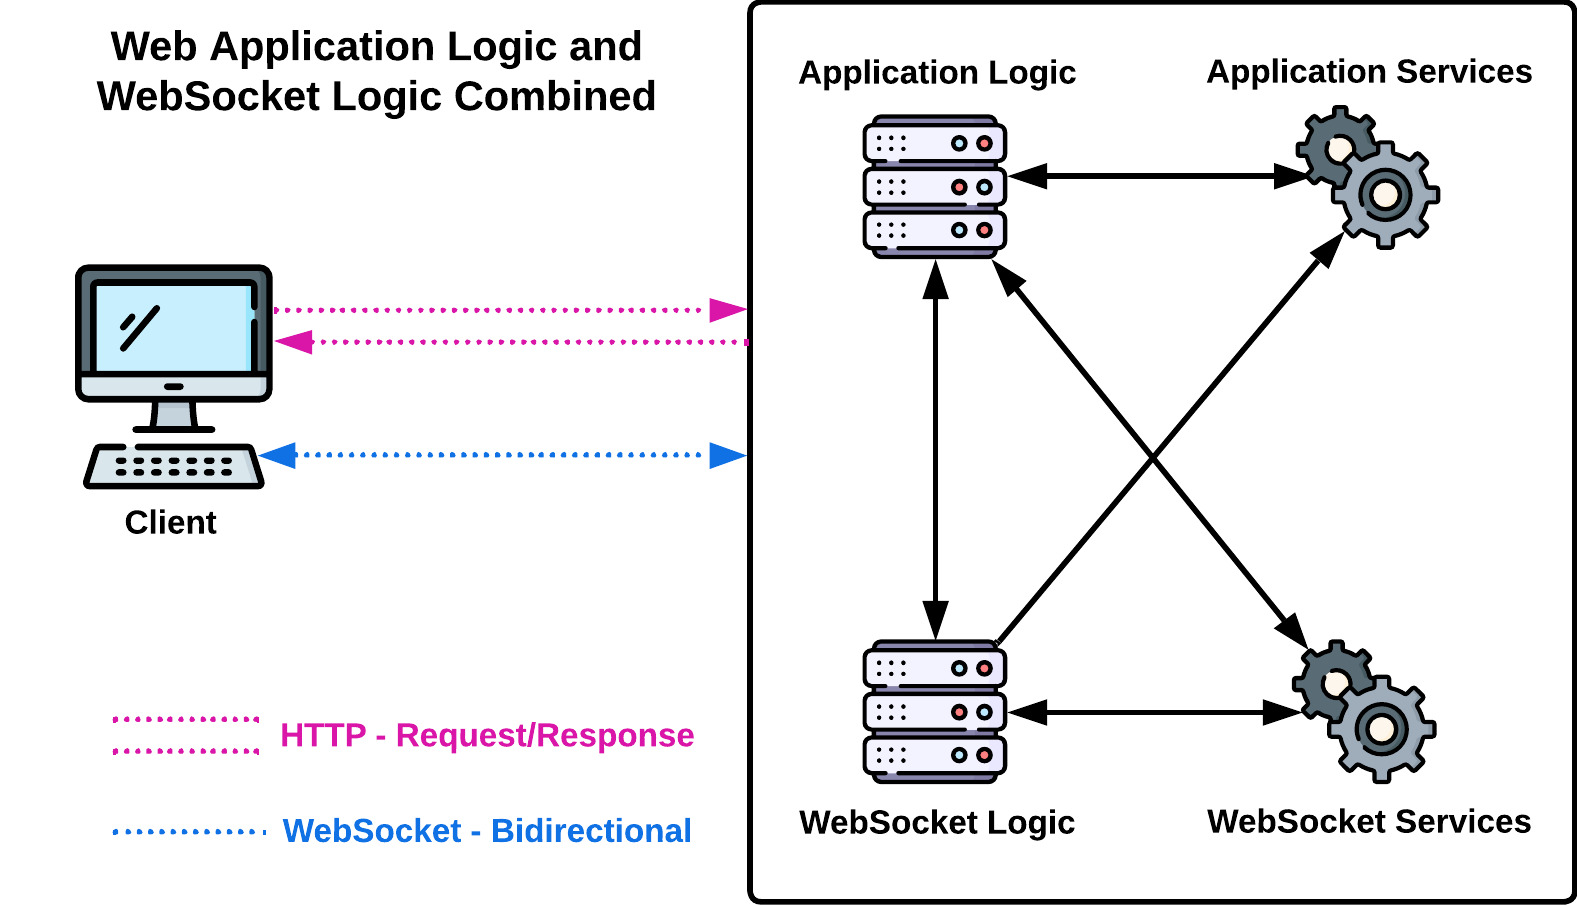 Diagram of web application and WebSocket application logic combined